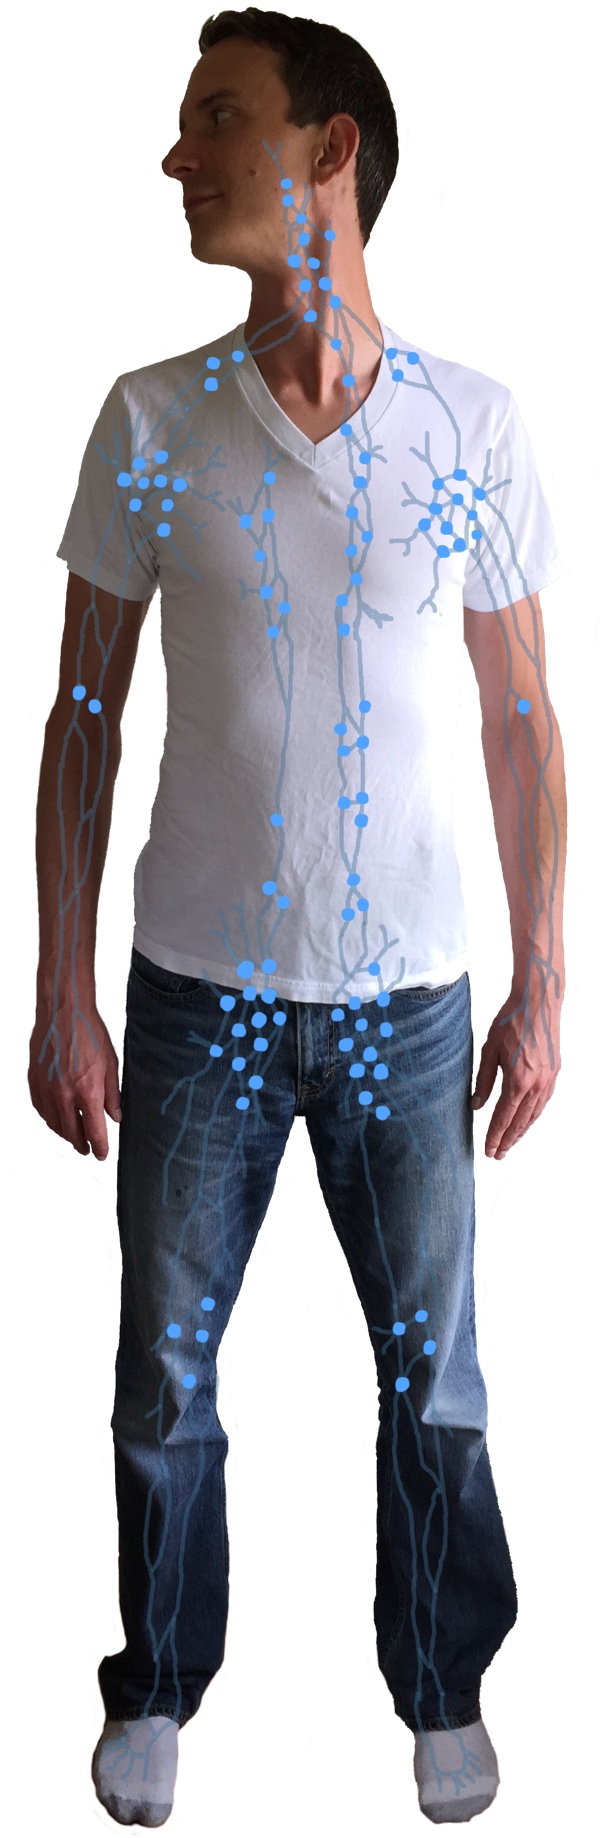 Drawing of Lymphatic System Overlaid on Man's Body